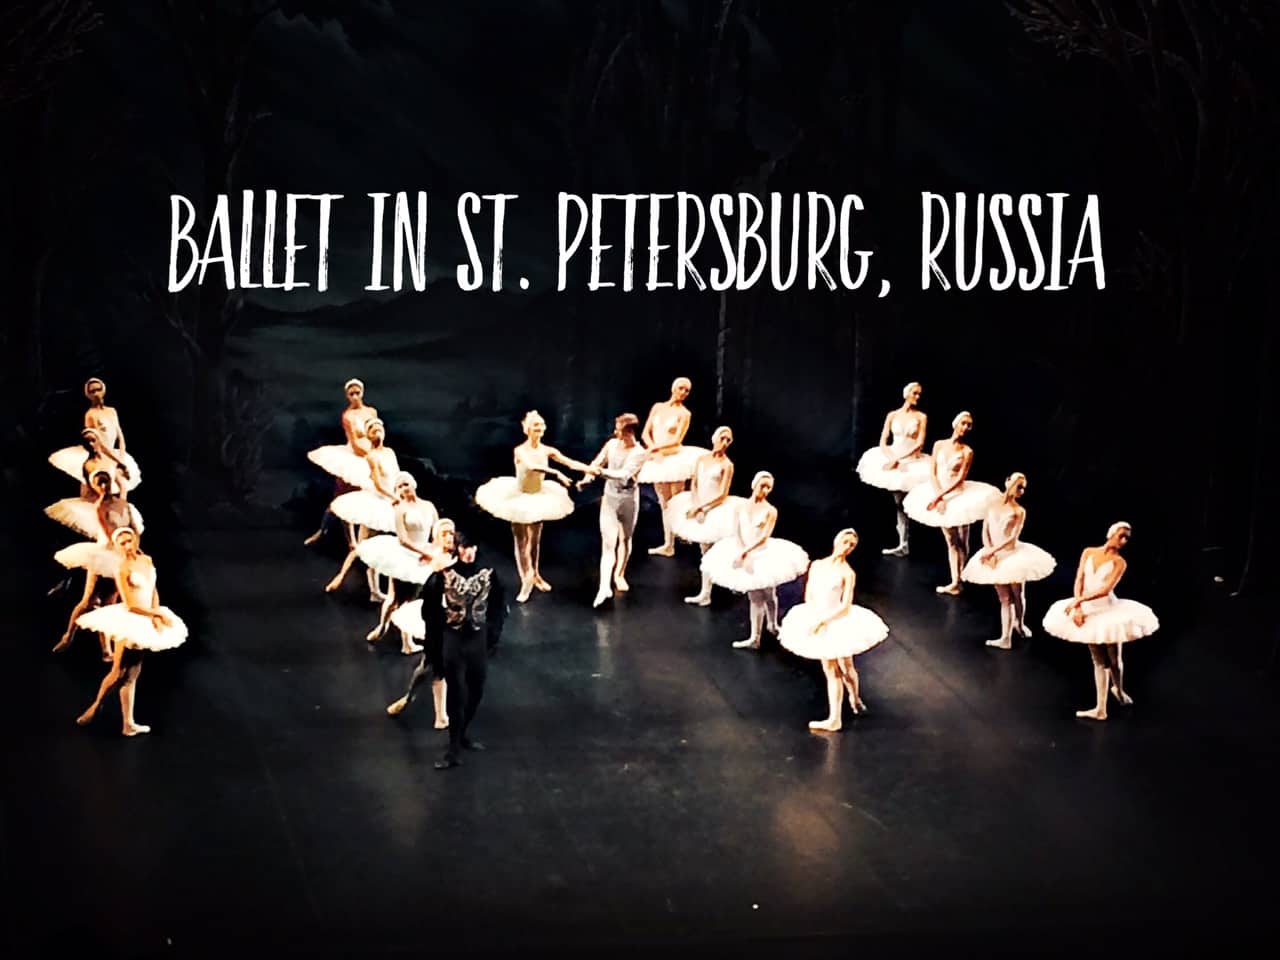 Guide to ballet in Russia: where to see ballet in St. Petersburg & Moscow